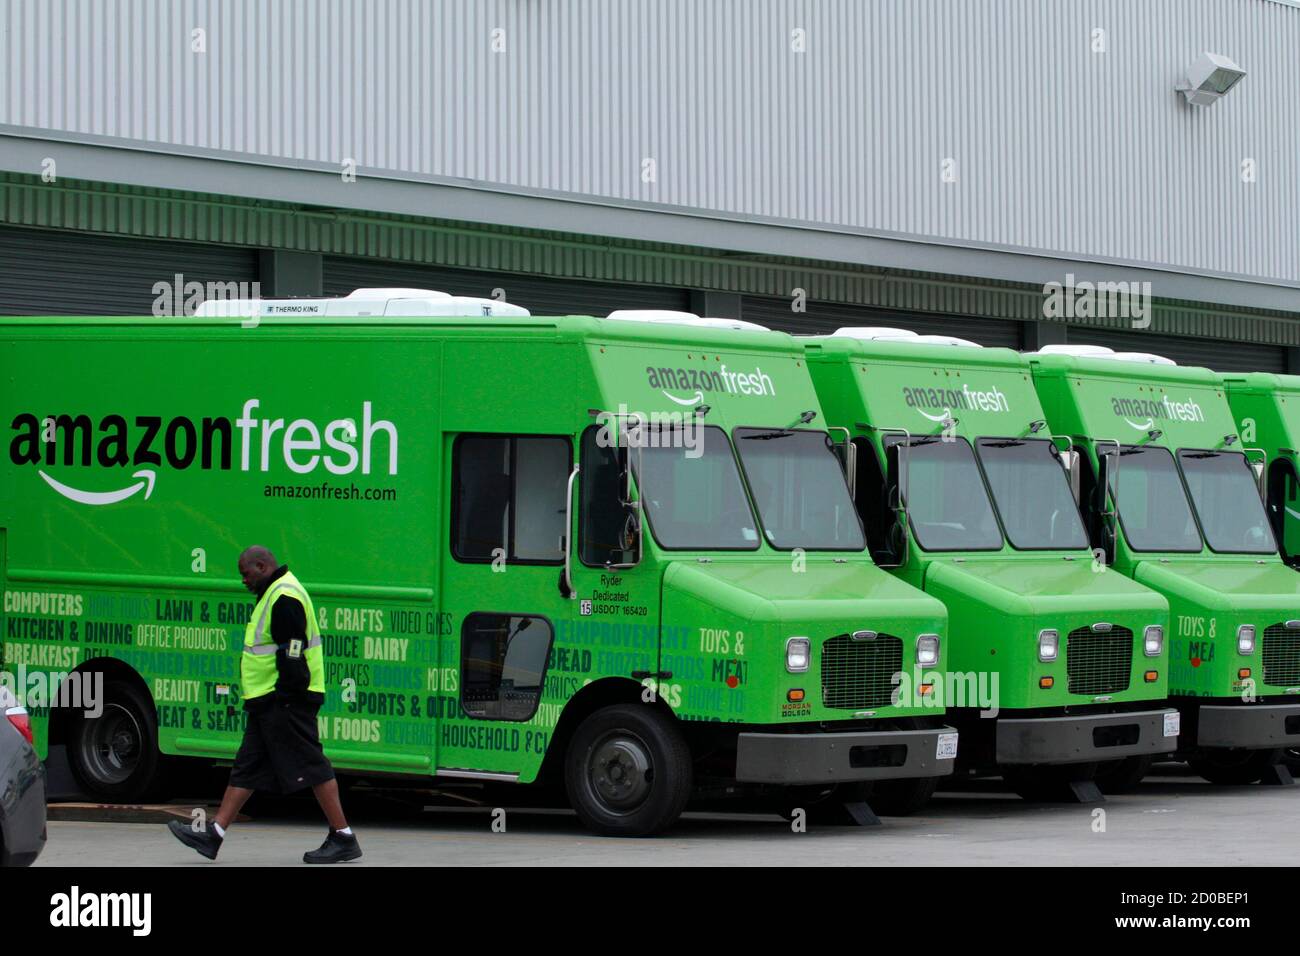 Amazon Fresh Delivery High Resolution Stock Photography and Images - Alamy